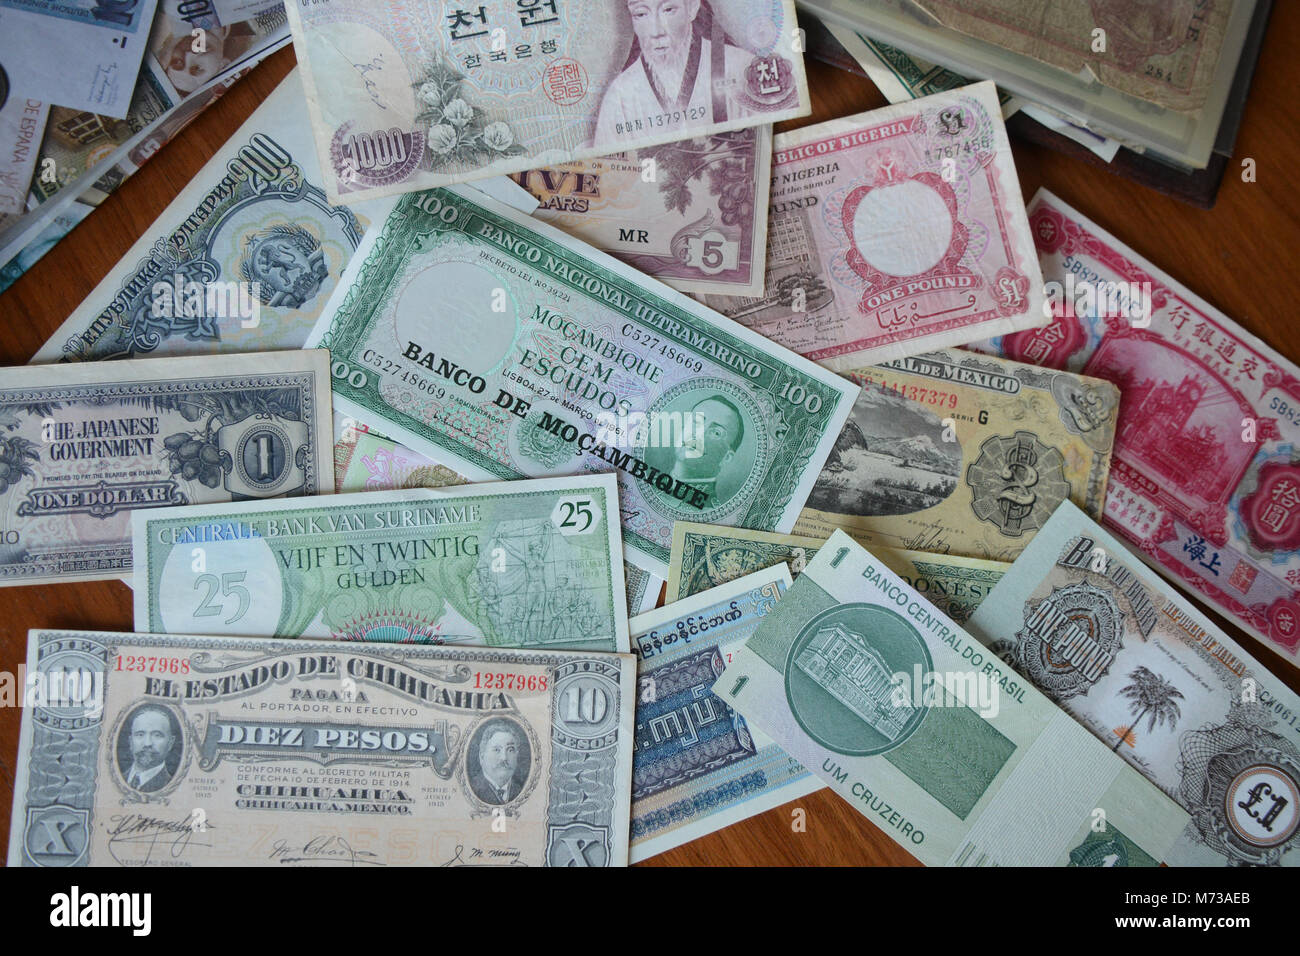 A image of old foreign money not UK notes from around the world Stock Photo